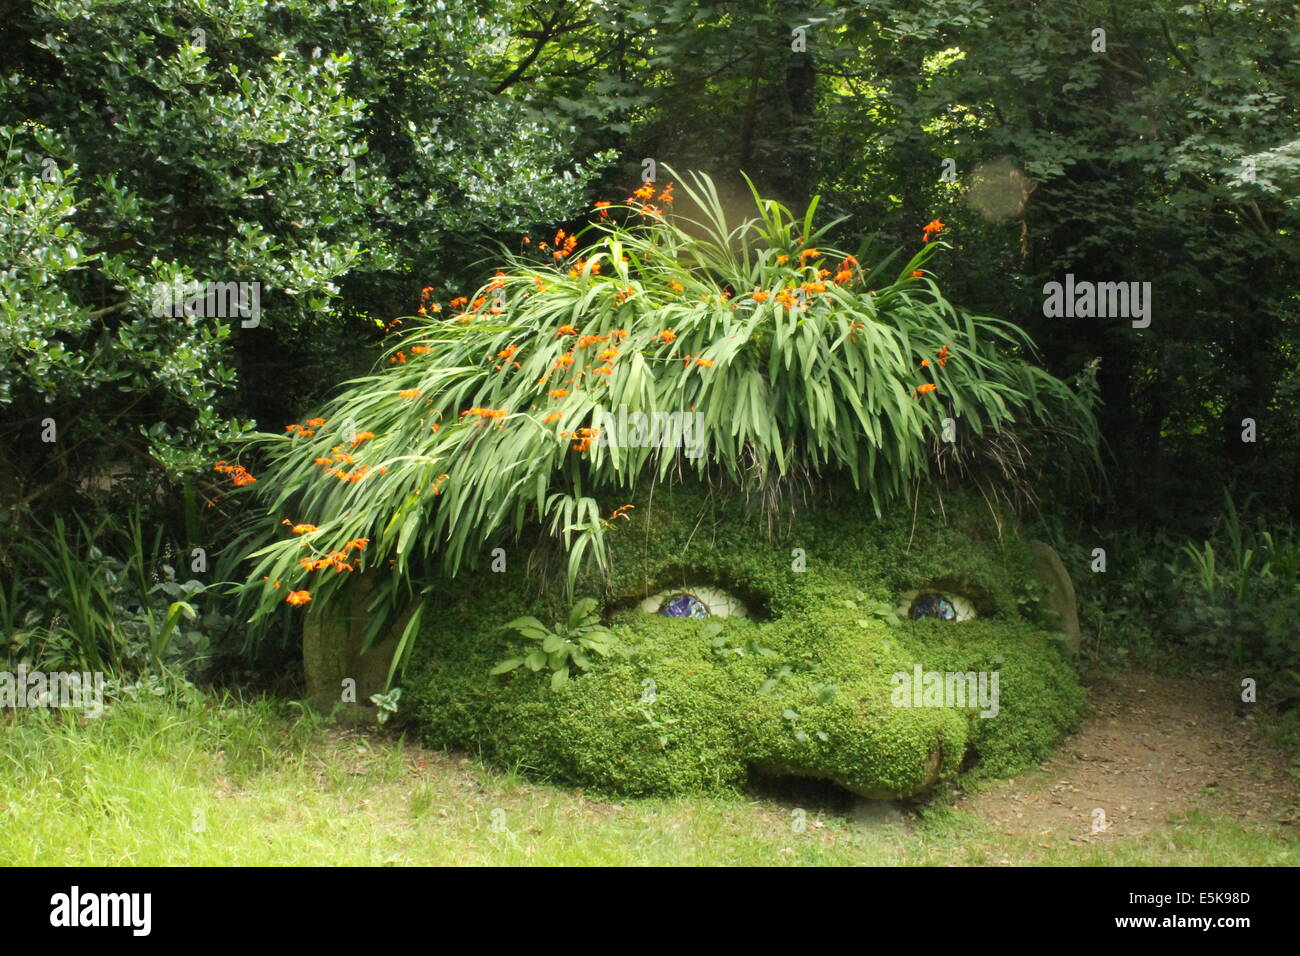 Giant's Head woodland sculpture in the woodland garden at The Lost Gardens of Heligan, Cornwall, England, UK Stock Photo